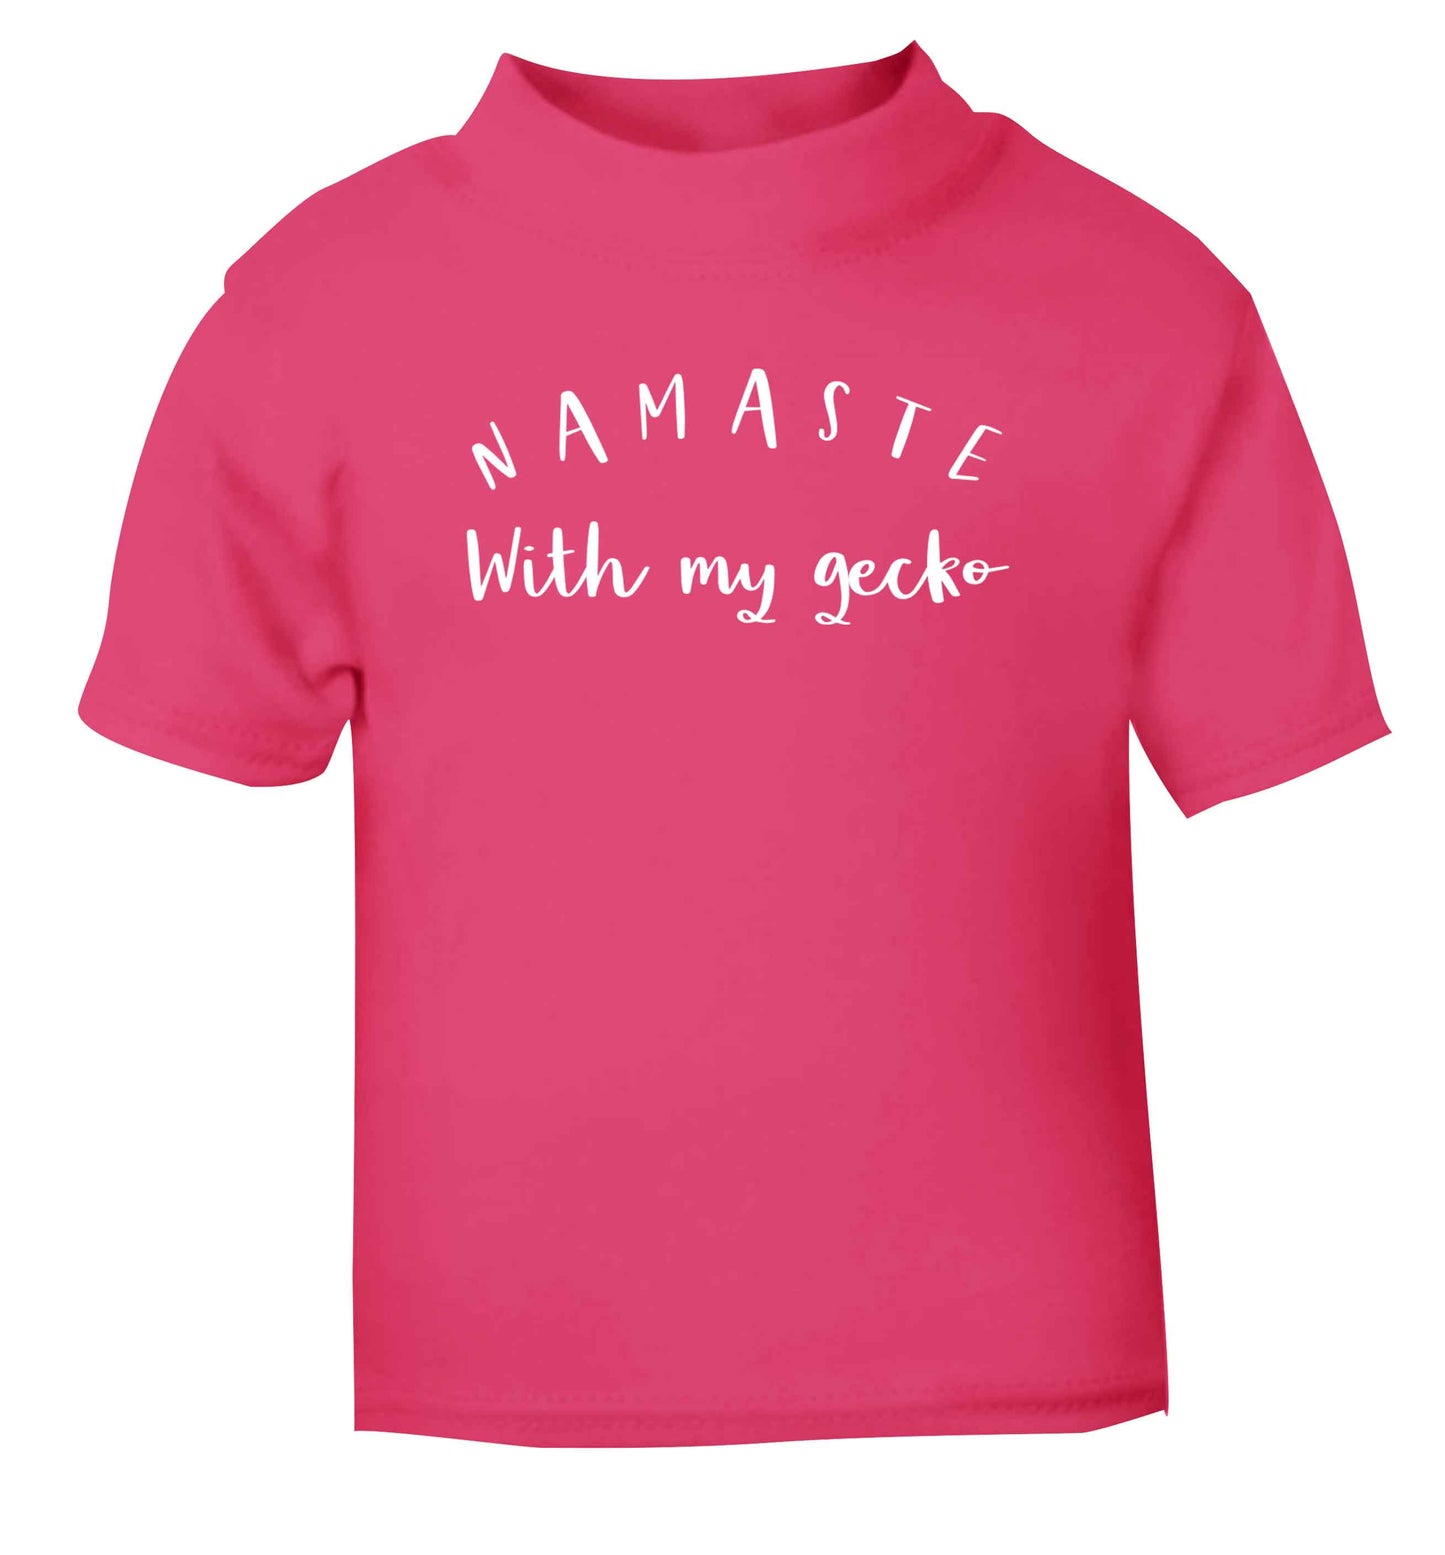 Namaste with my gecko pink Baby Toddler Tshirt 2 Years